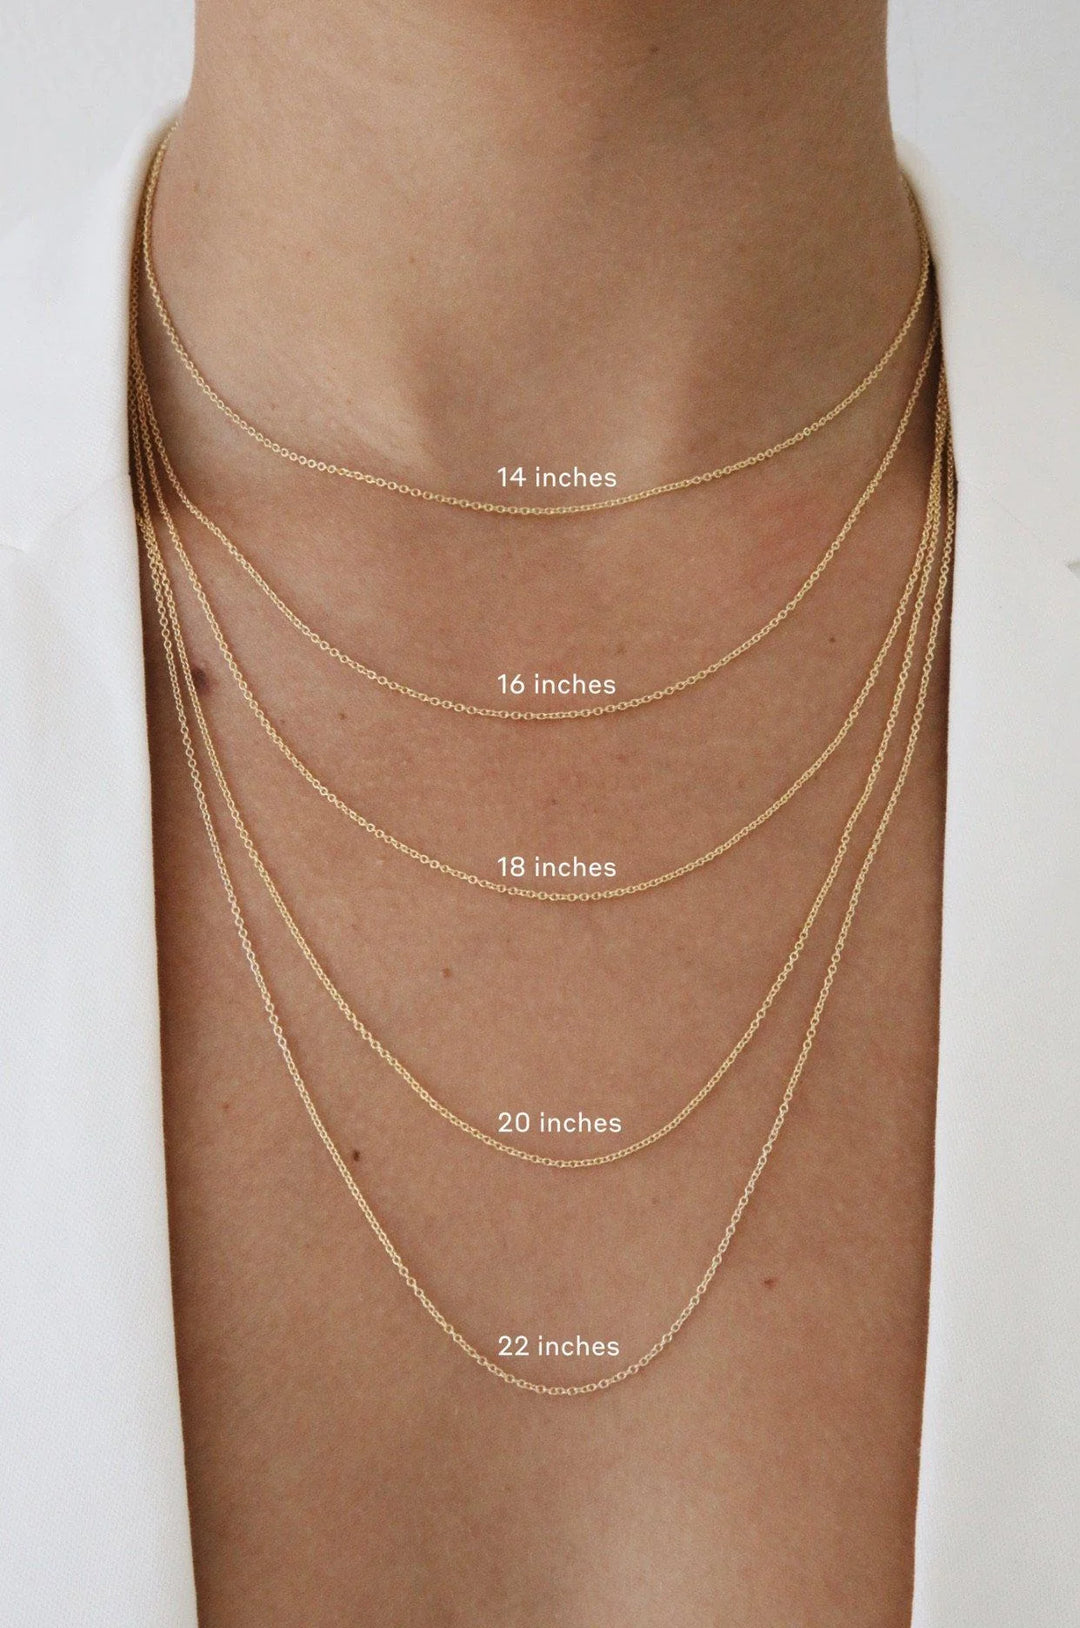 Letitia Necklace - Solid Gold